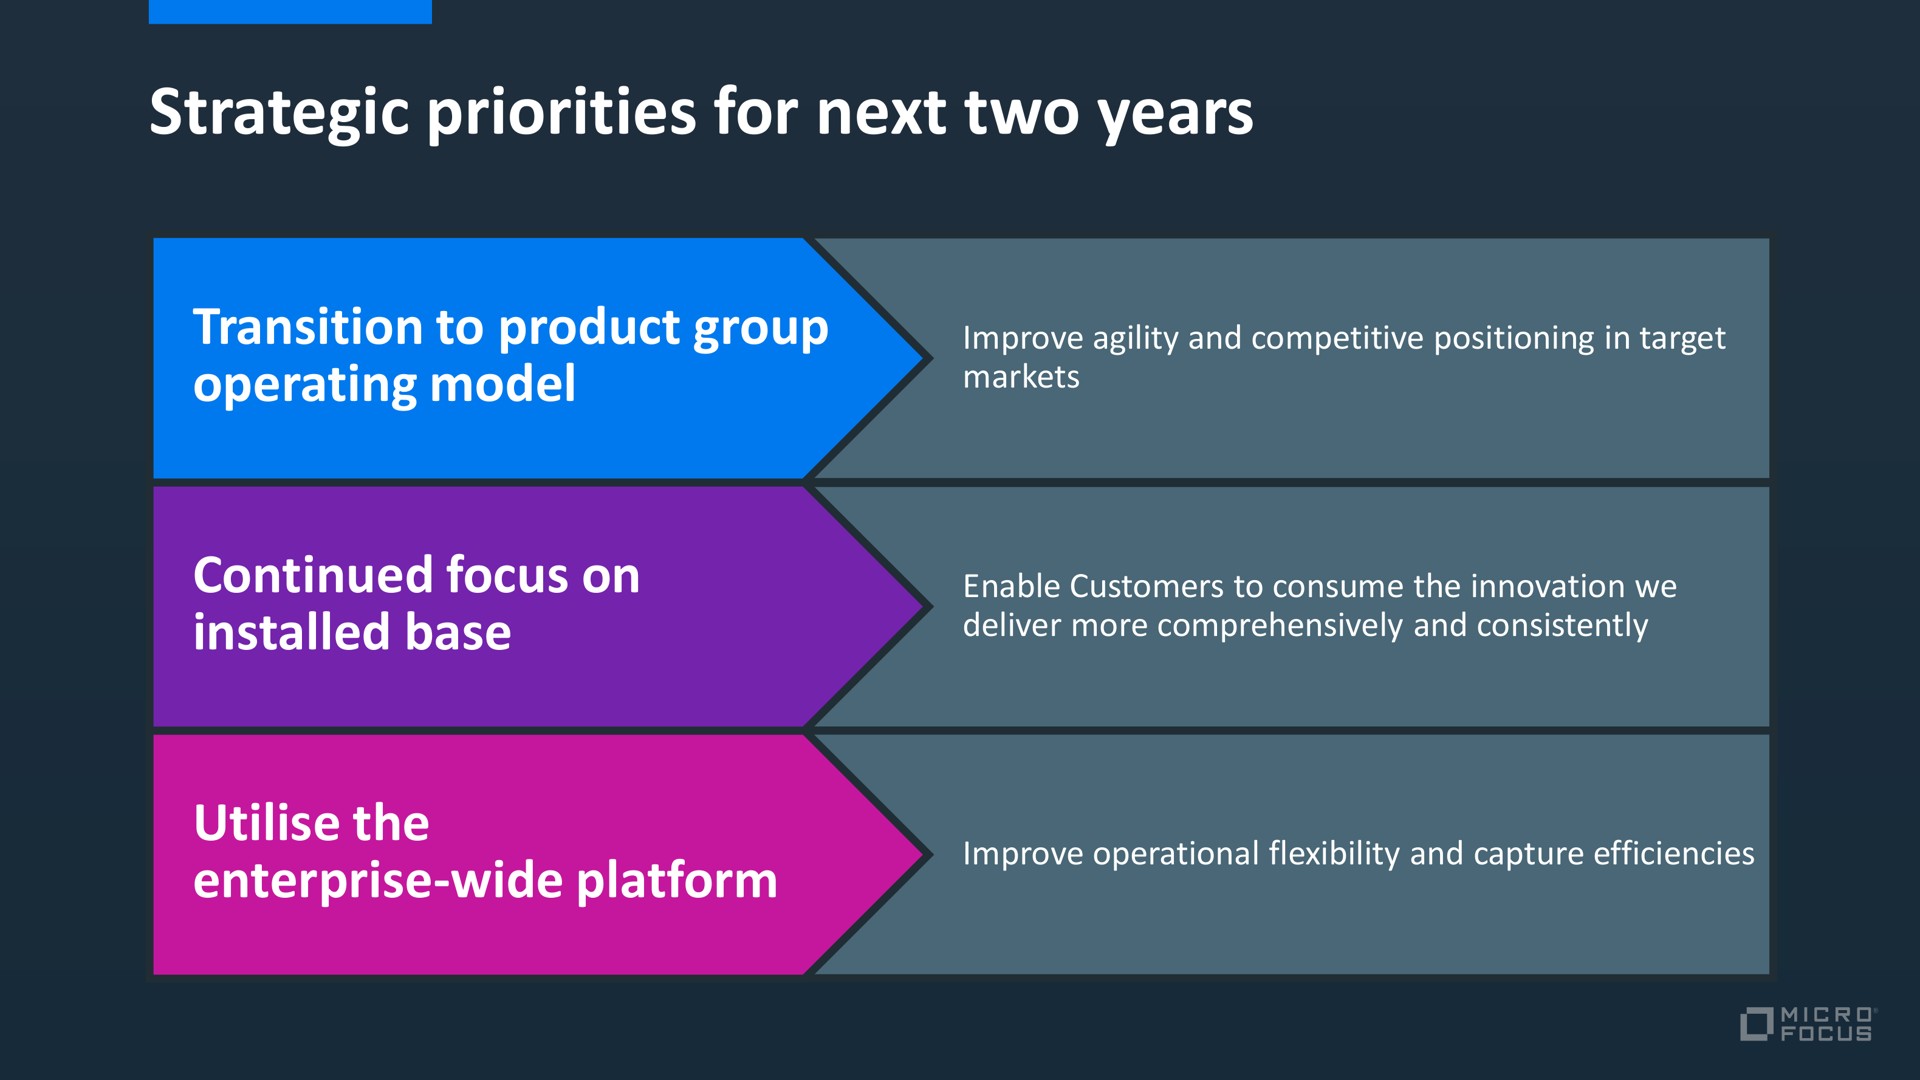 strategic priorities for next two years transition to product group operating model continued focus on base the enterprise wide platform | Micro Focus